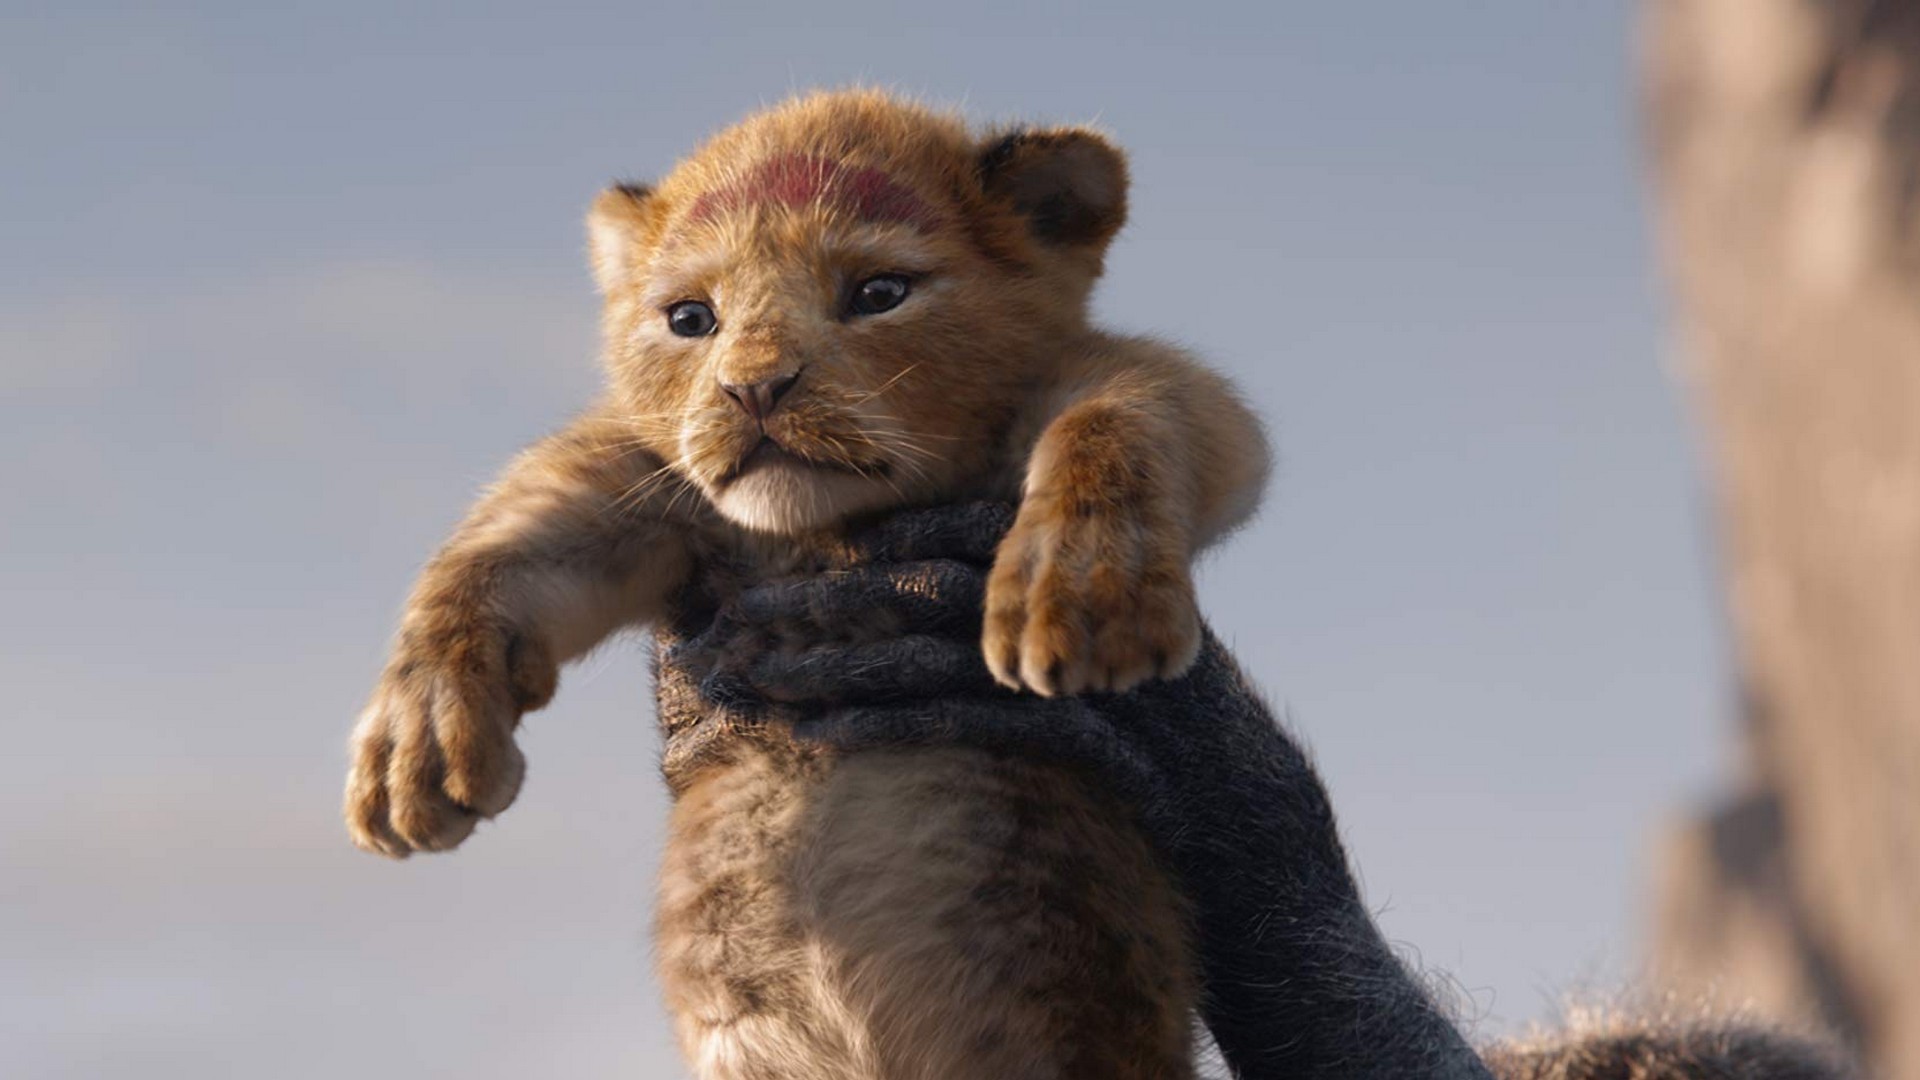 The Lion King 2019 Movie Wallpaper with high-resolution 1920x1080 pixel. You can use this poster wallpaper for your Desktop Computers, Mac Screensavers, Windows Backgrounds, iPhone Wallpapers, Tablet or Android Lock screen and another Mobile device